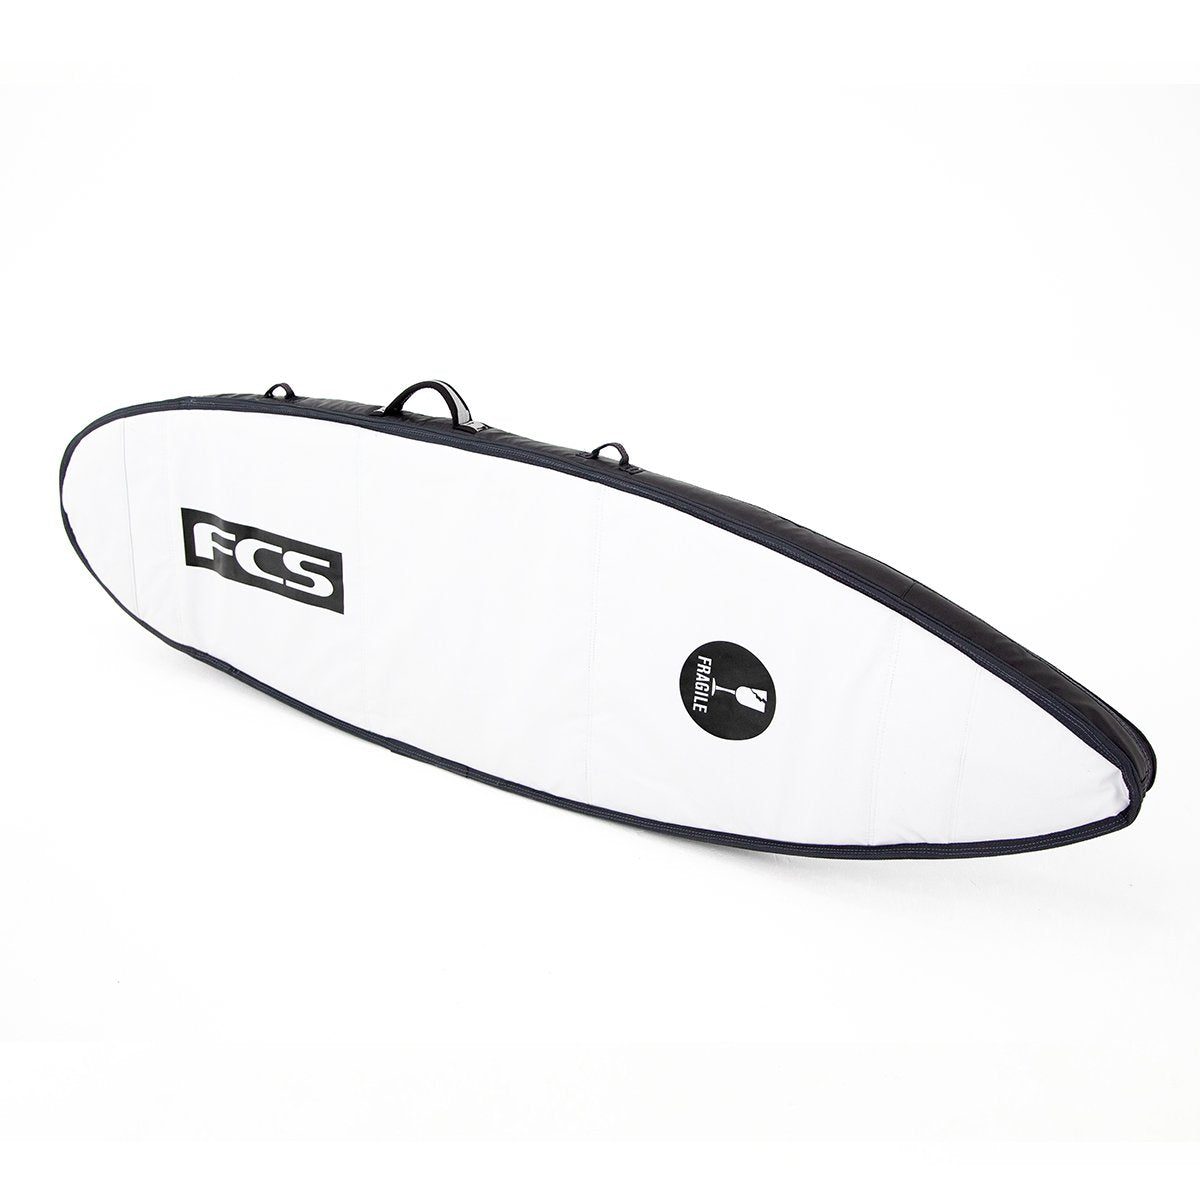 FCS TRAVEL 1 ALL PURPOSE SURFBOARD COVER